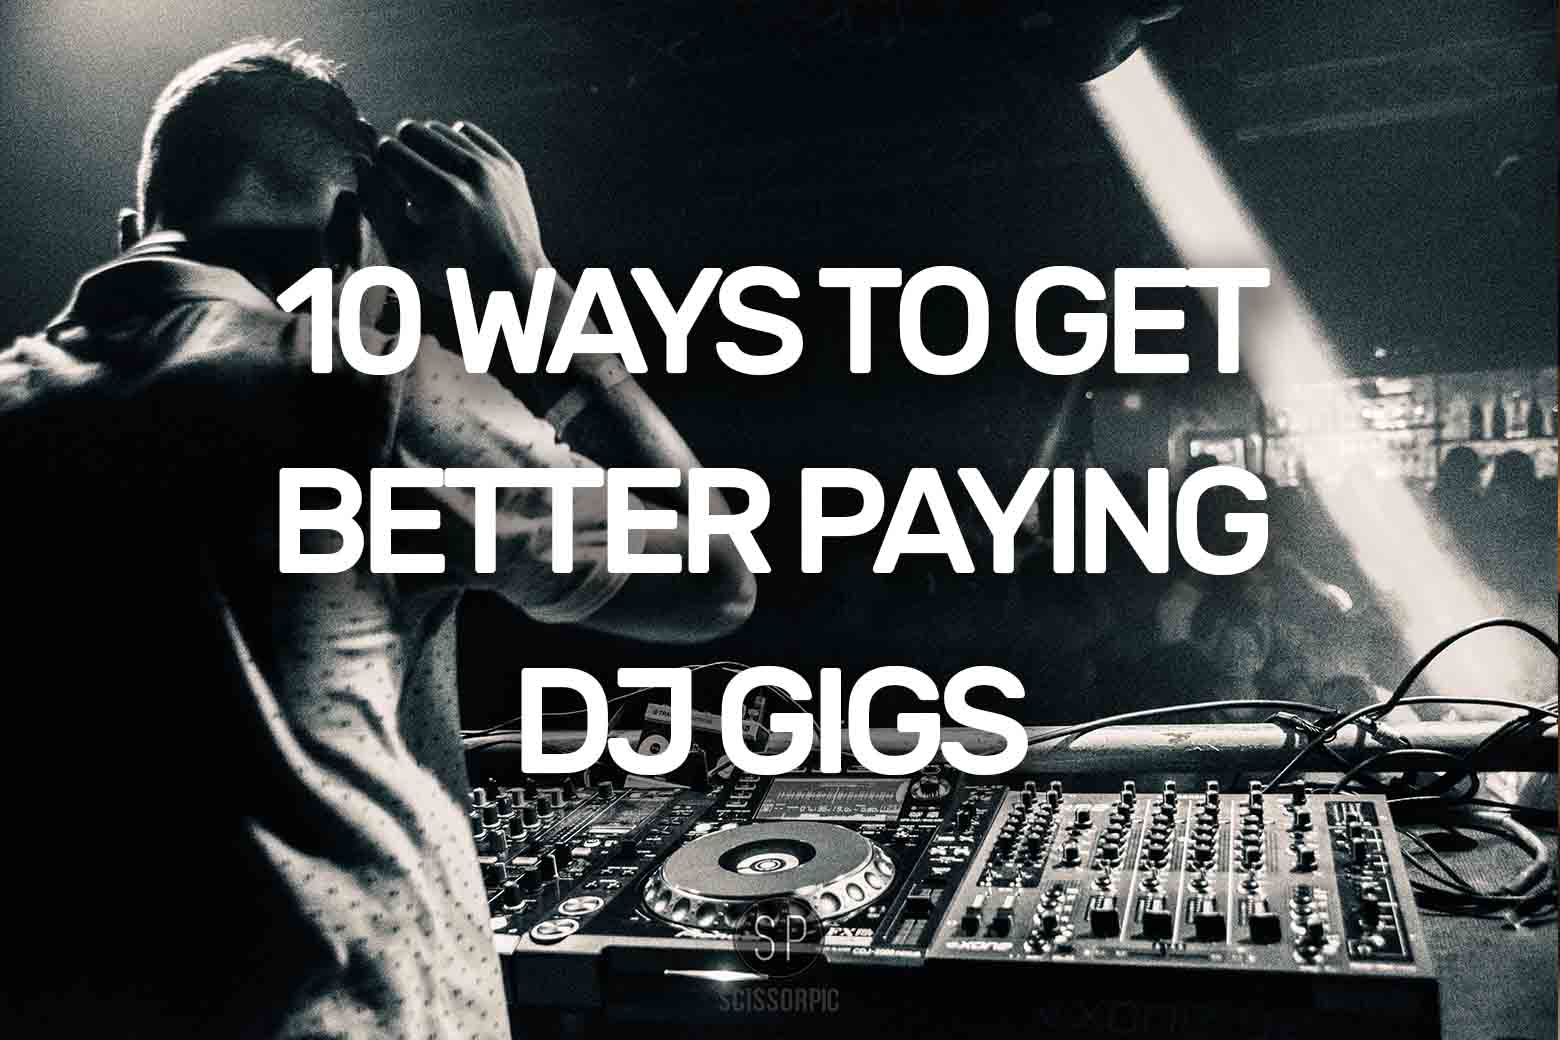 HOW TO GET DJ GIGS